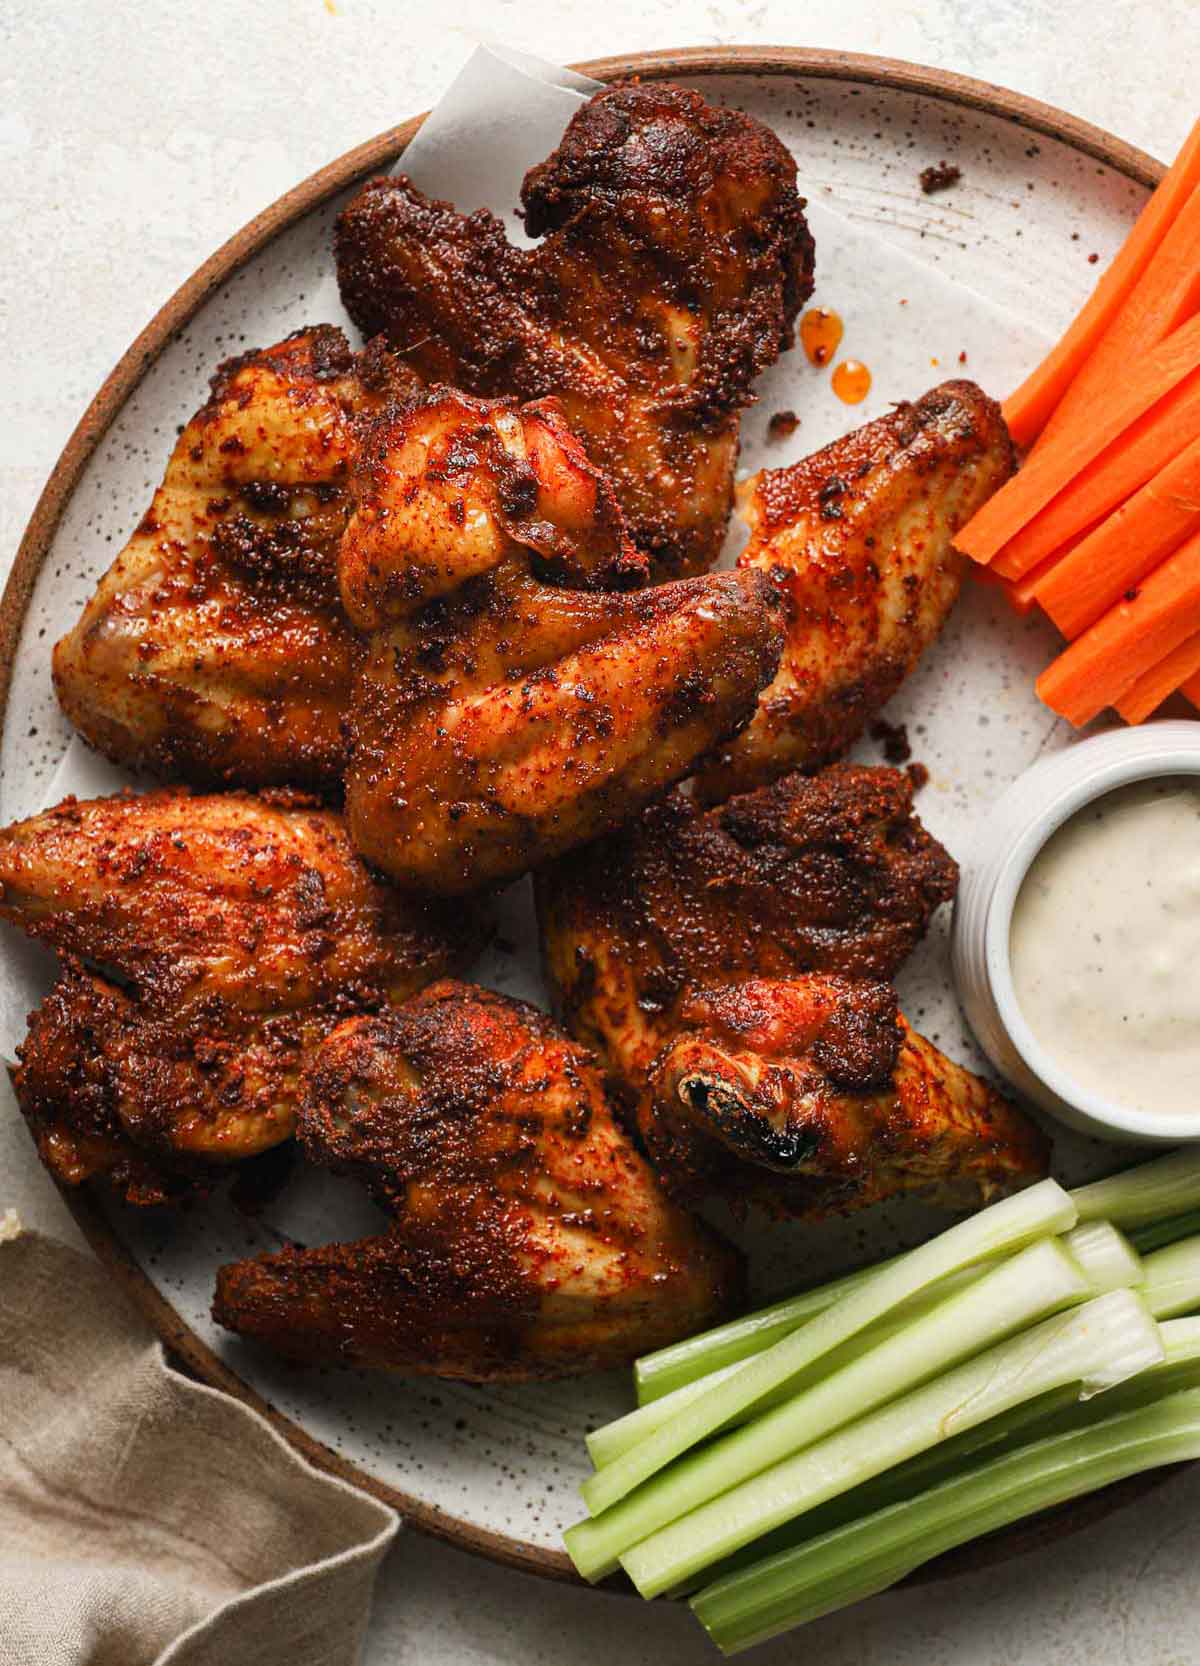 Platter of chicken wings with carrots, celery sticks, and ranch dressing.